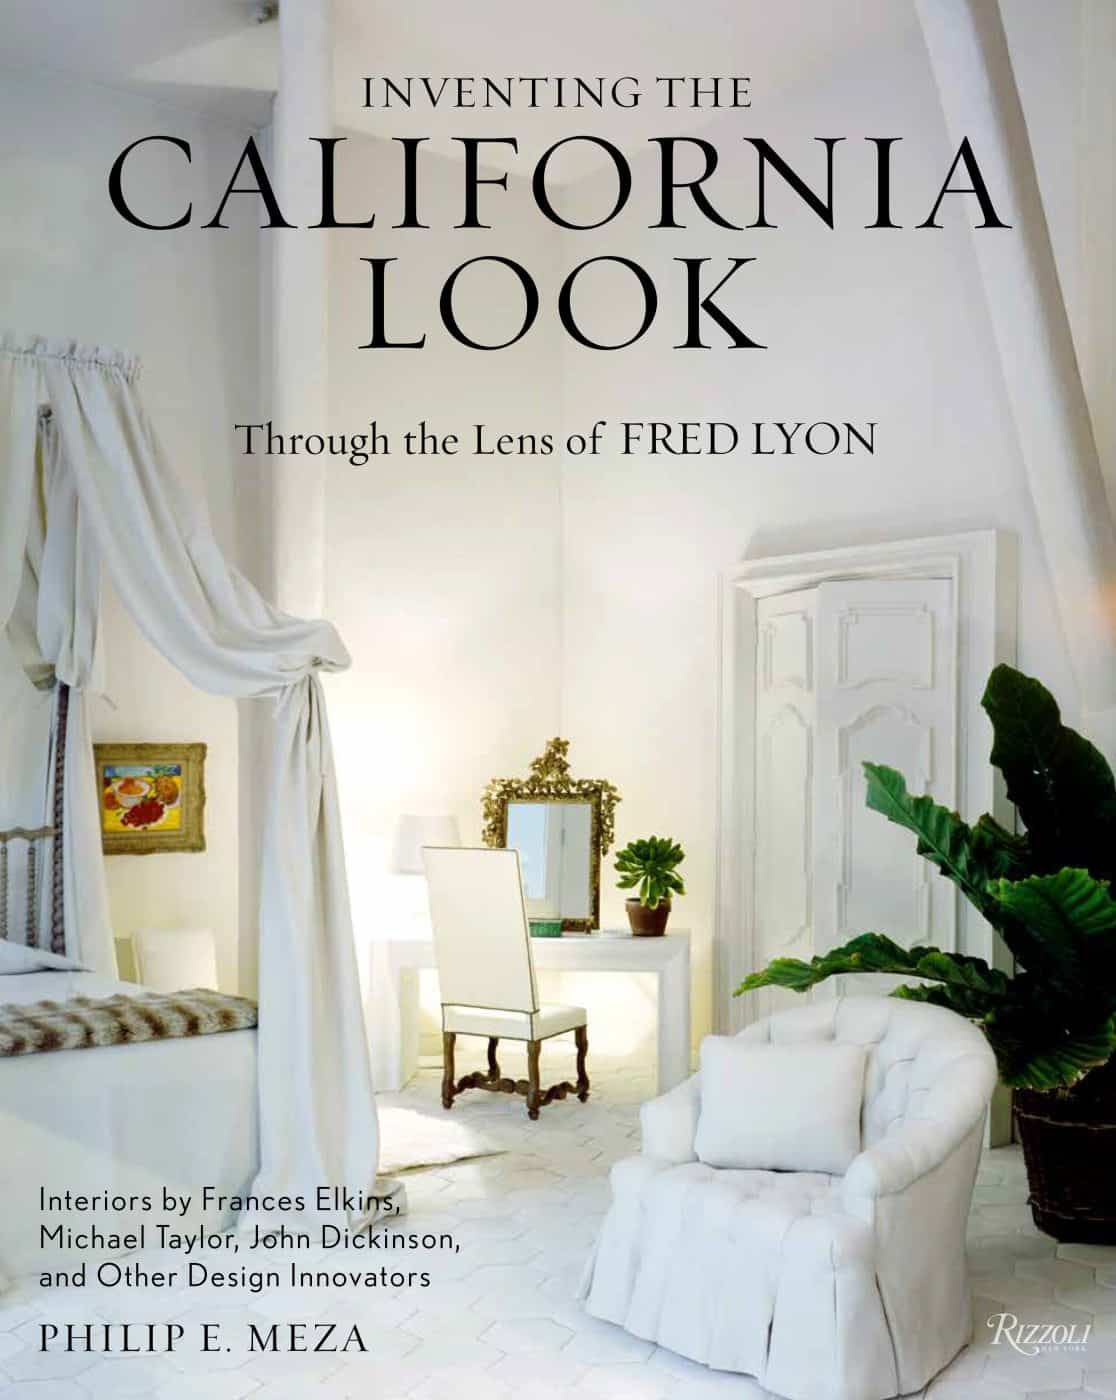 Front cover of Rizzoli's "Inventing the California Look: Interiors by Frances Elkins, Michael Taylor, John Dickinson, and Other Design Innovators"